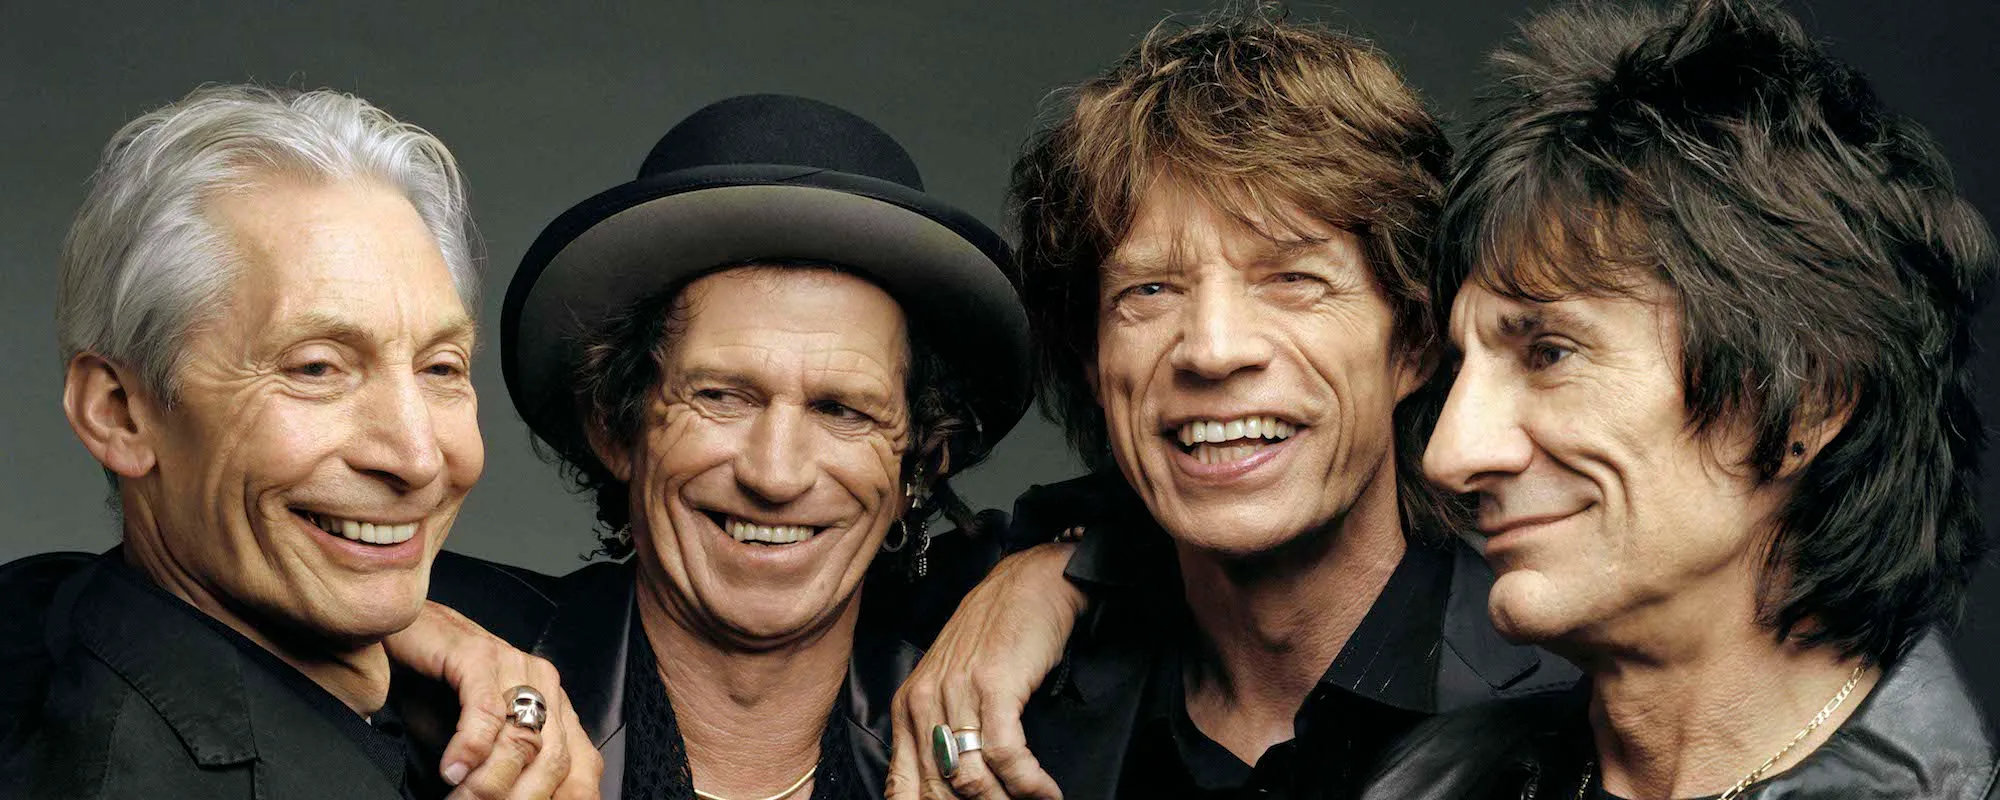 The Rolling Stones Release “We Love You” Video for the First Time Online